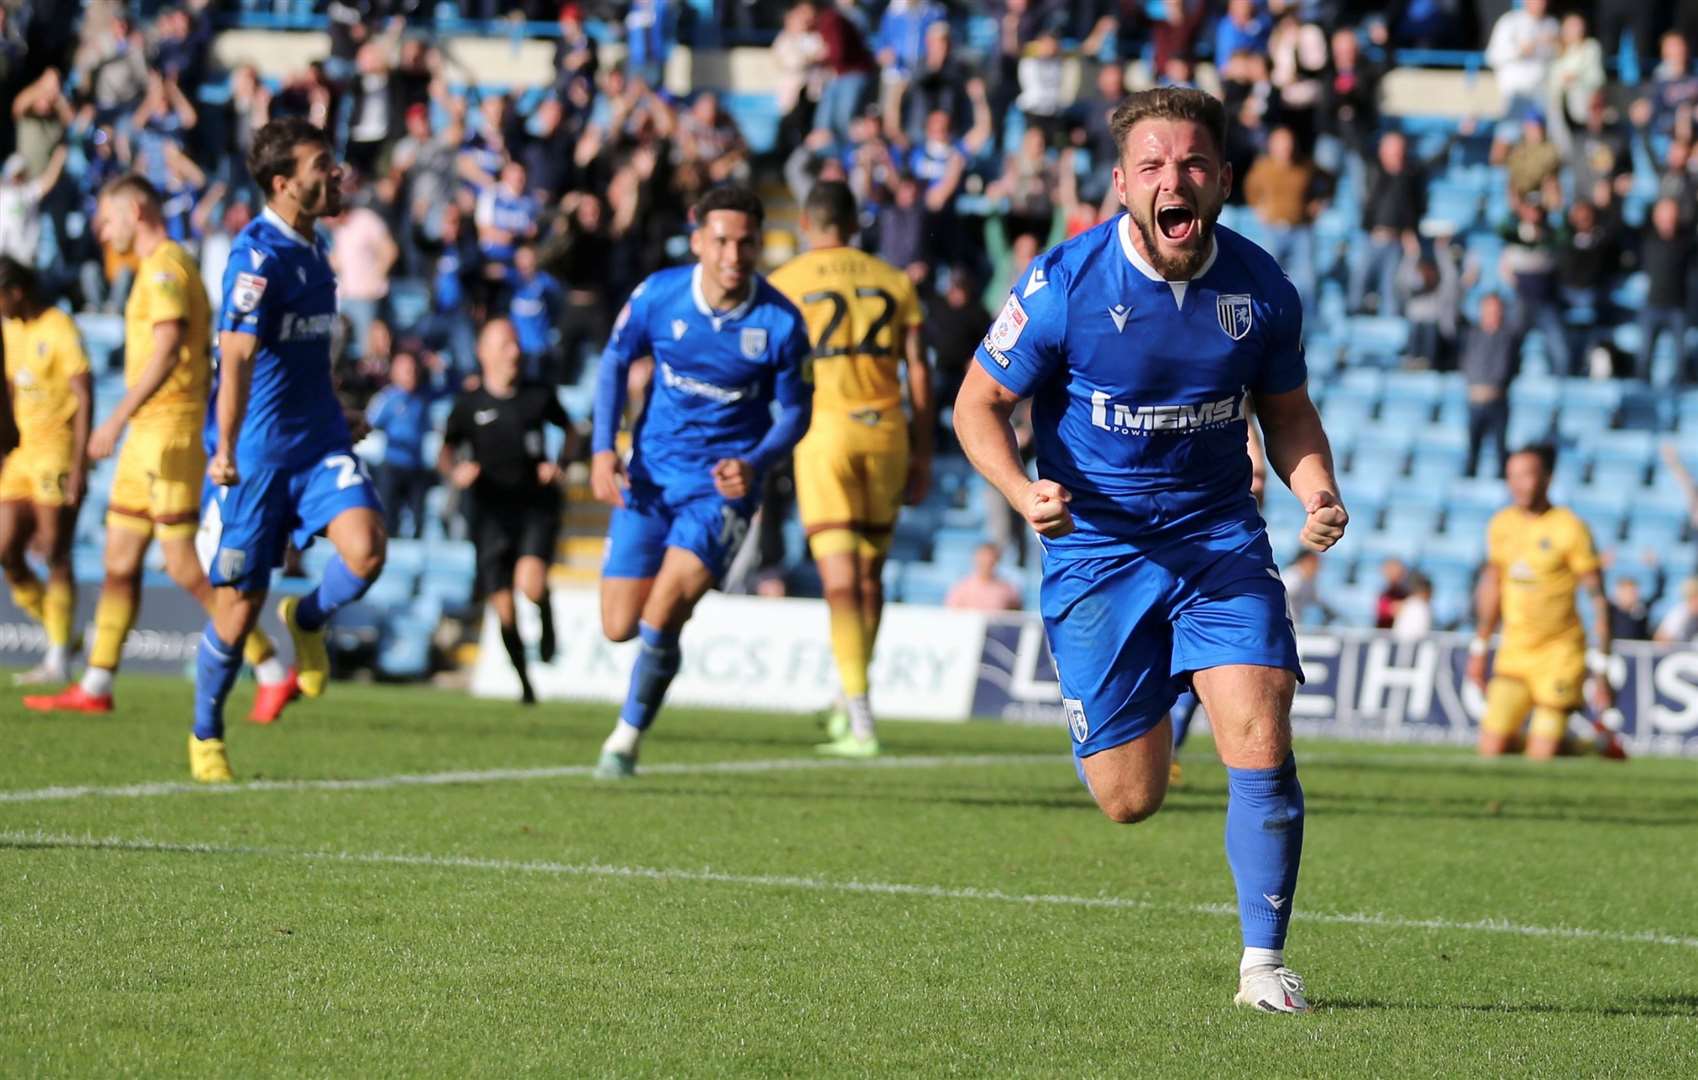 Gillingham’s former boss Neil Harris wanted Alex MacDonald to sign a new deal but he moved to Steve Evans’ Stevenage last summer